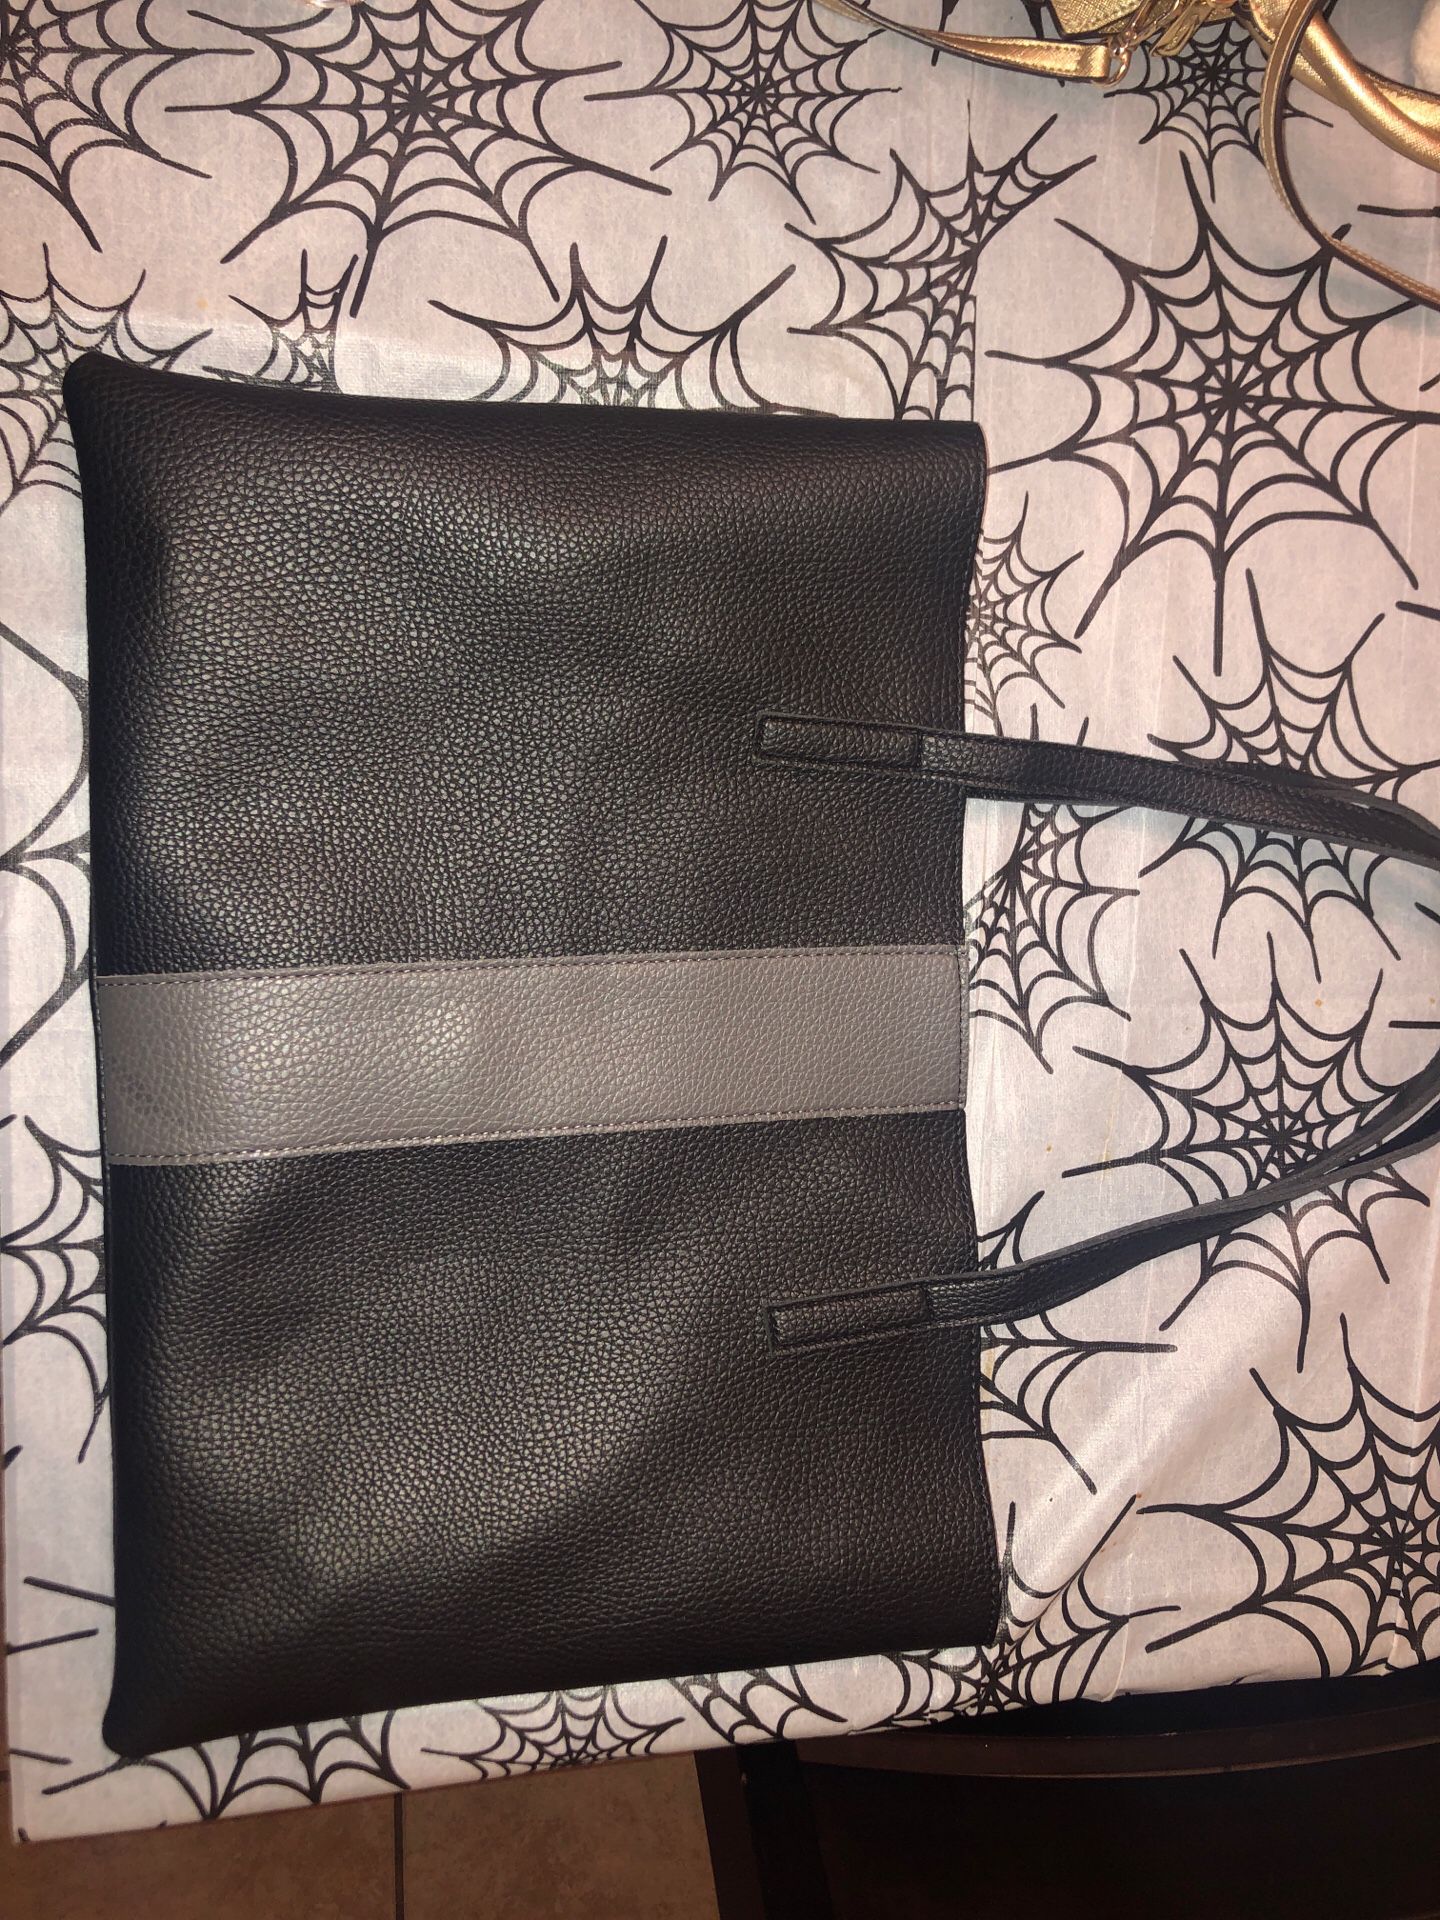 Vince Camuto Vegan Leather tote bag